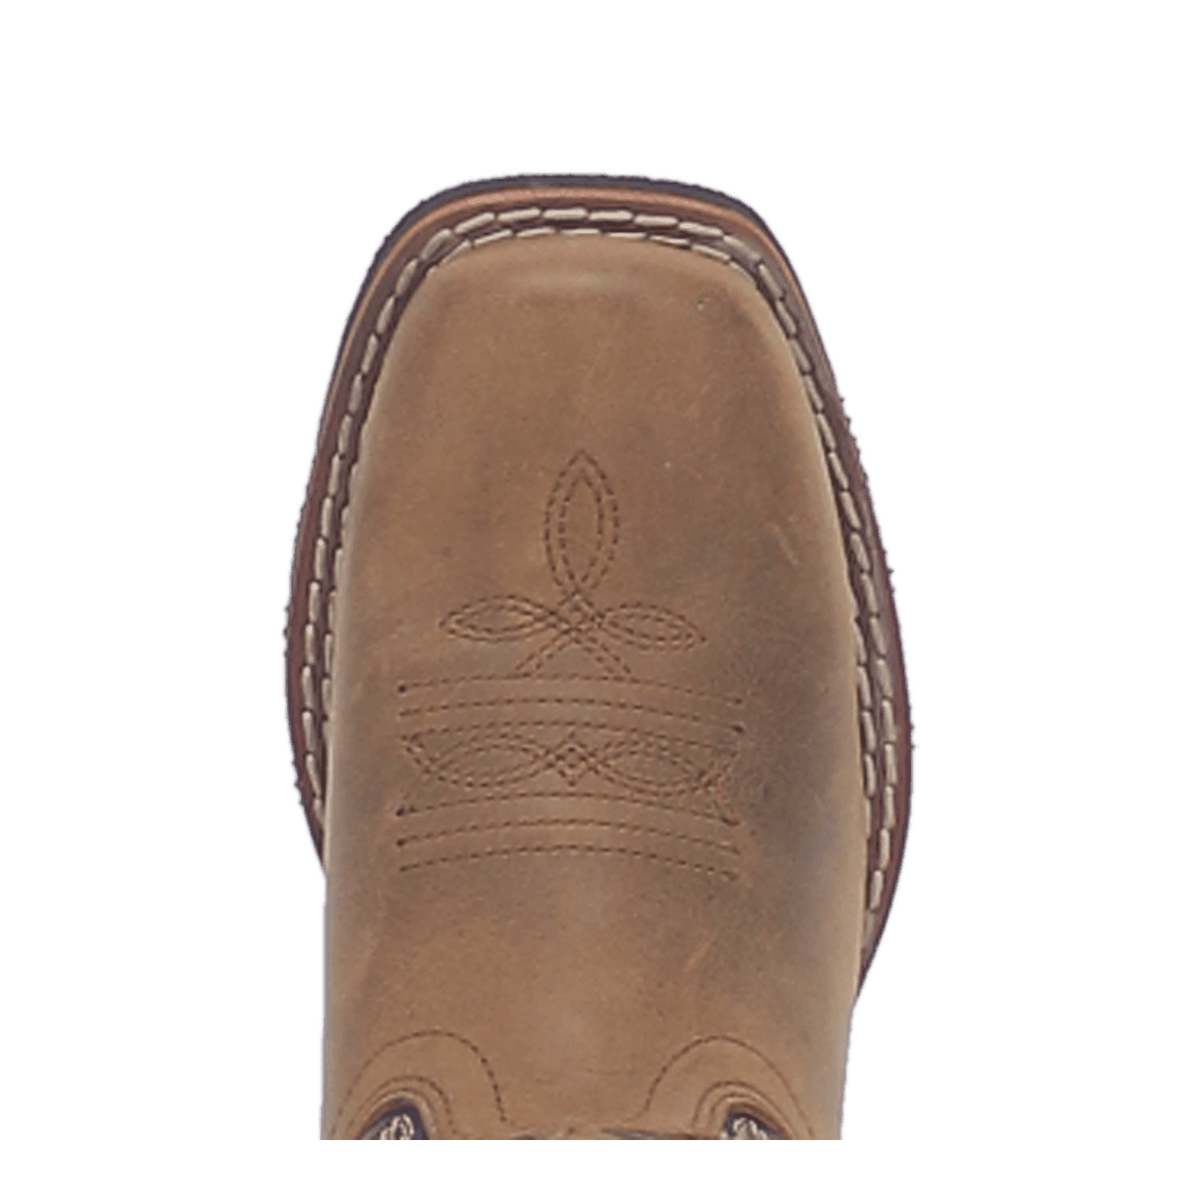 RASCAL LEATHER CHILDREN'S BOOT Image